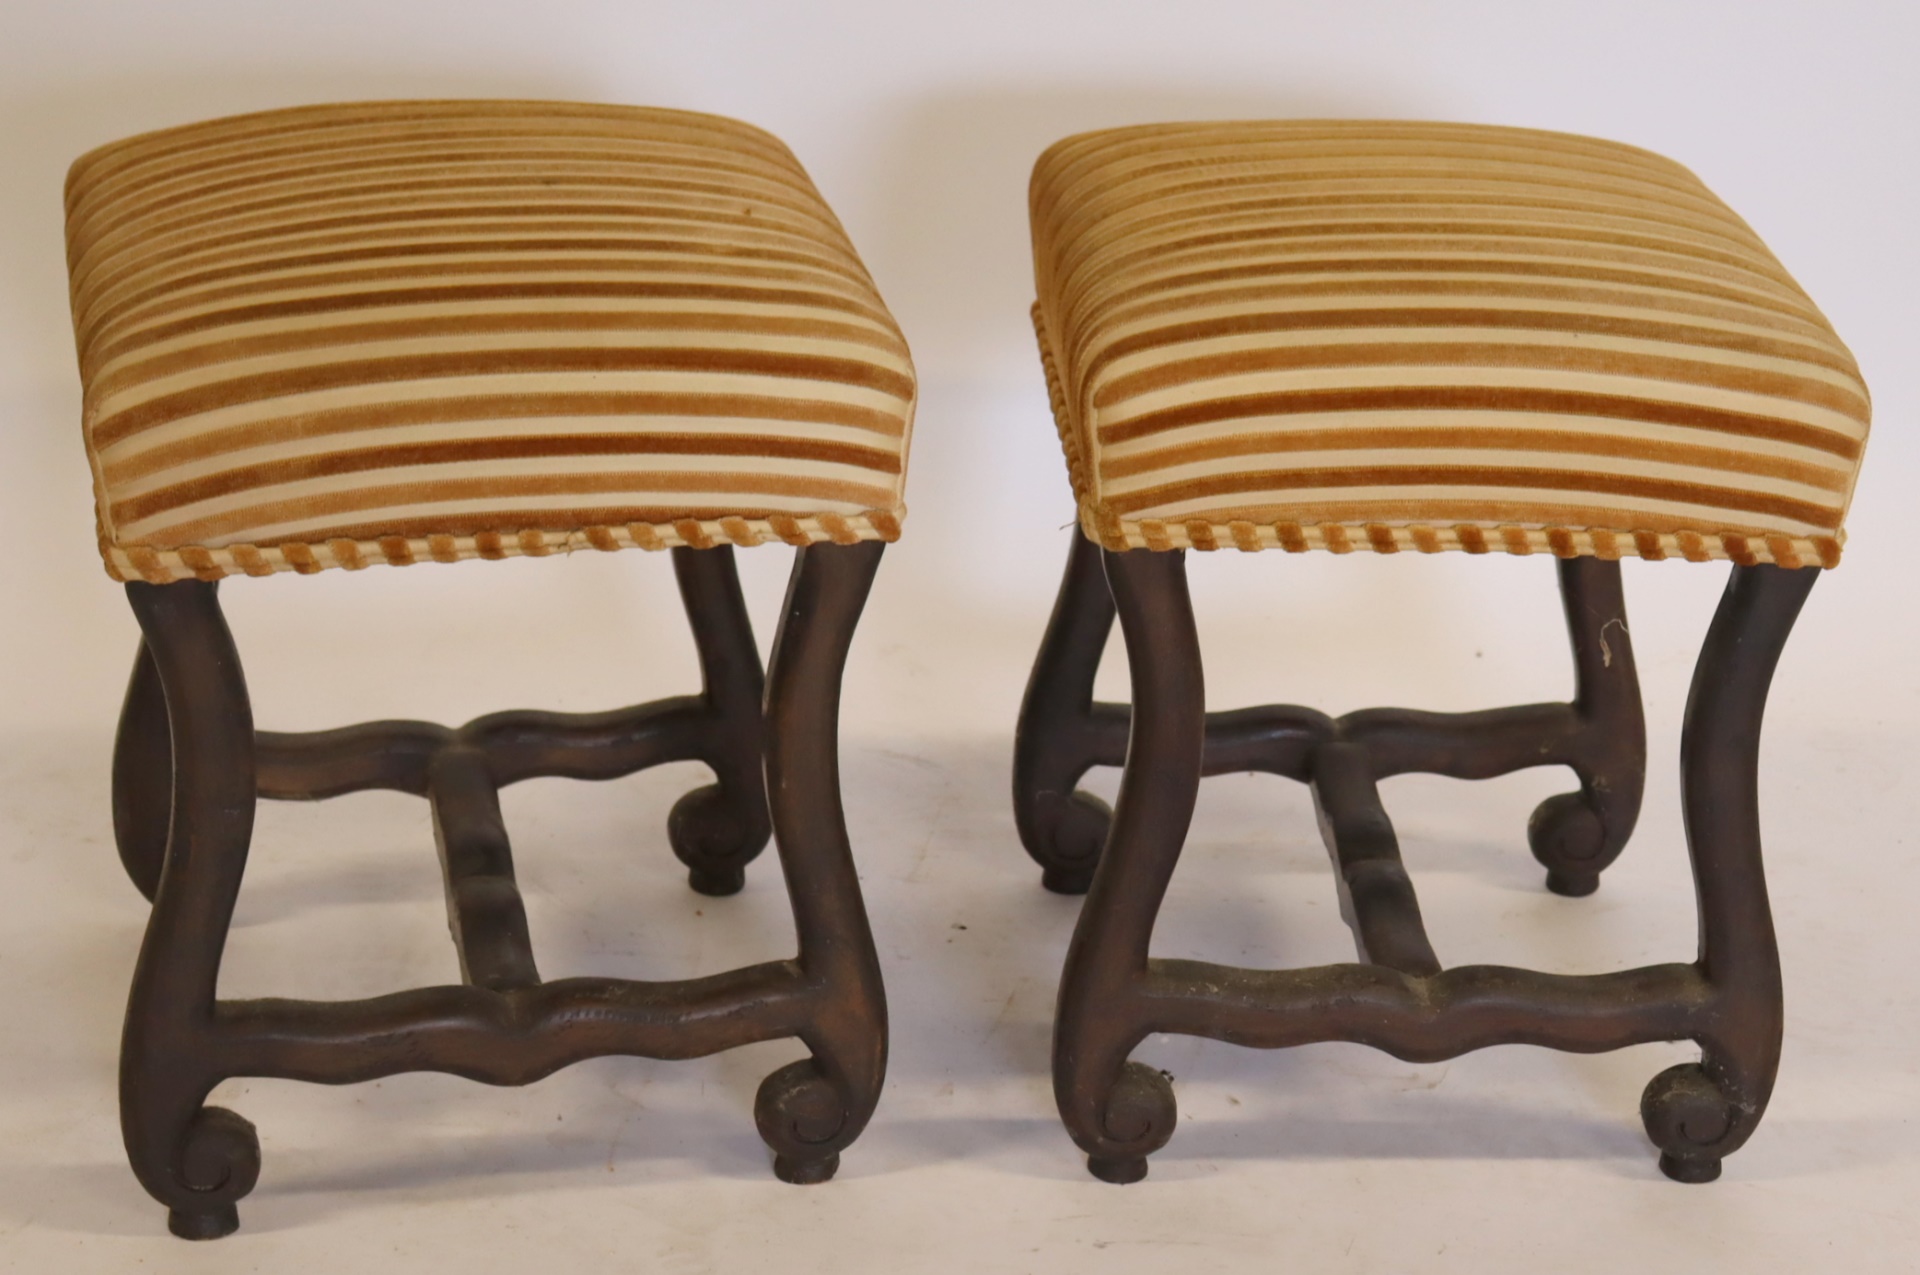 AN ANTIQUE PAIR OF SPANISH STYLE